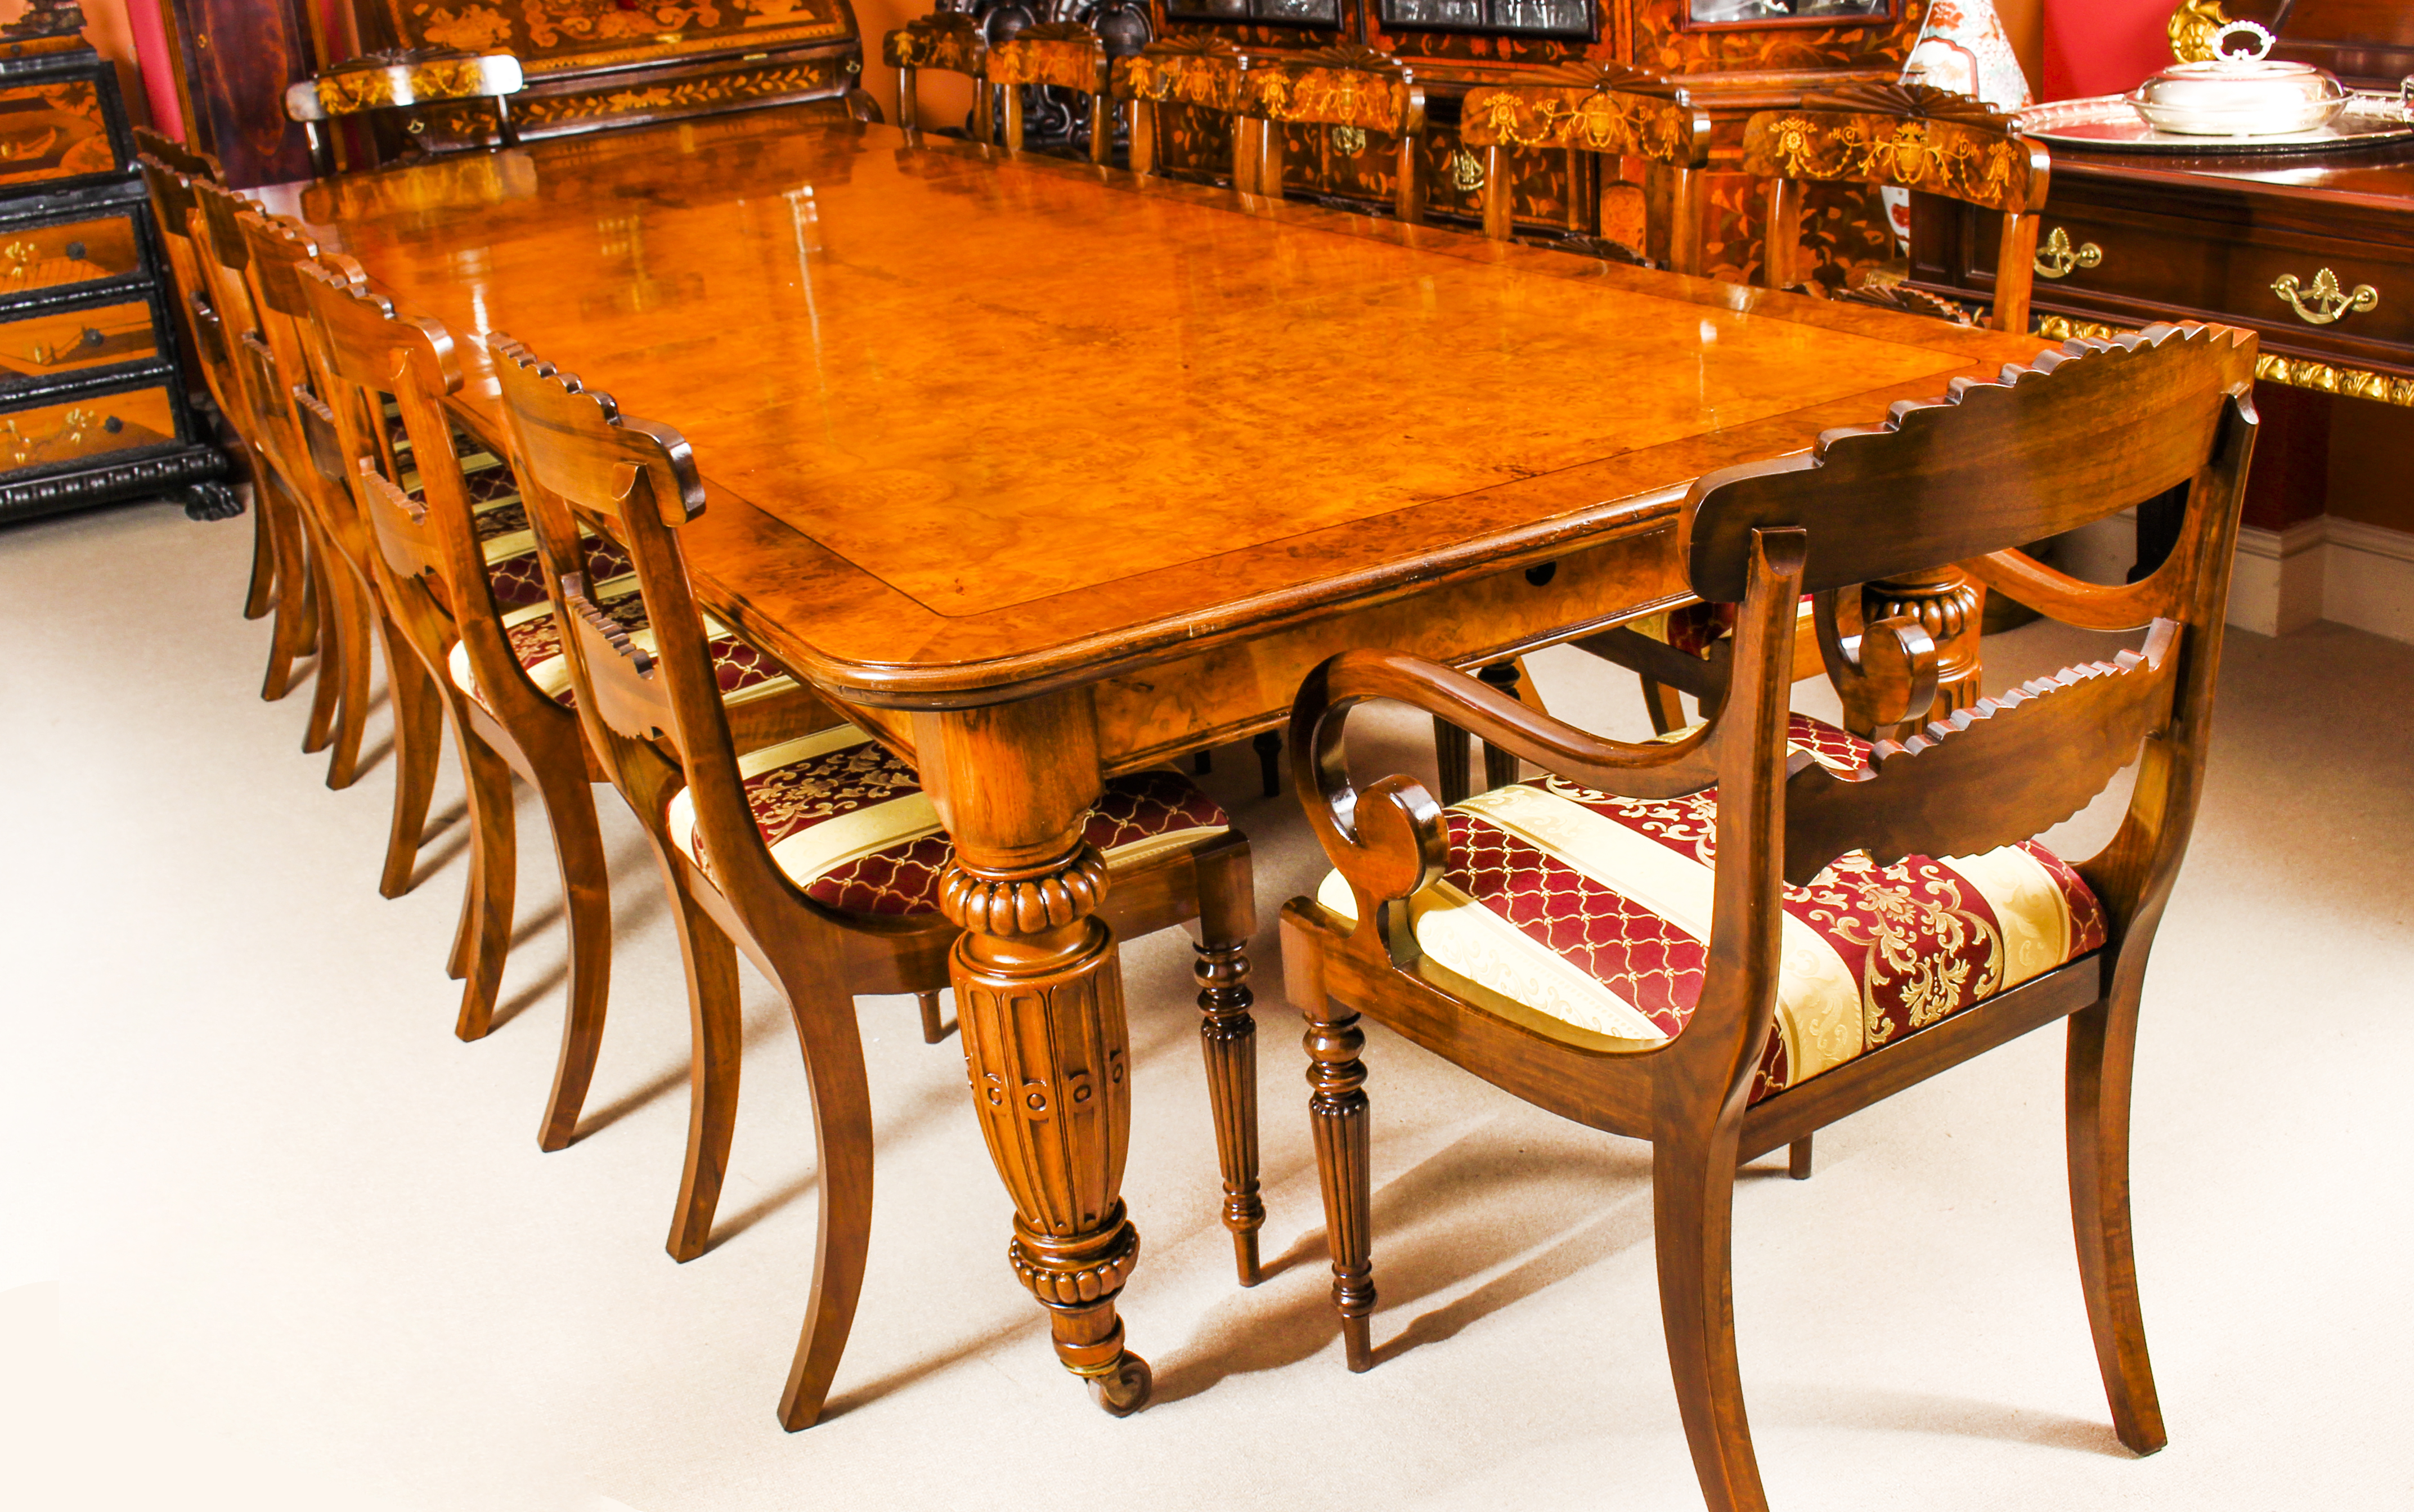 Old Dining Room Tables For Sale